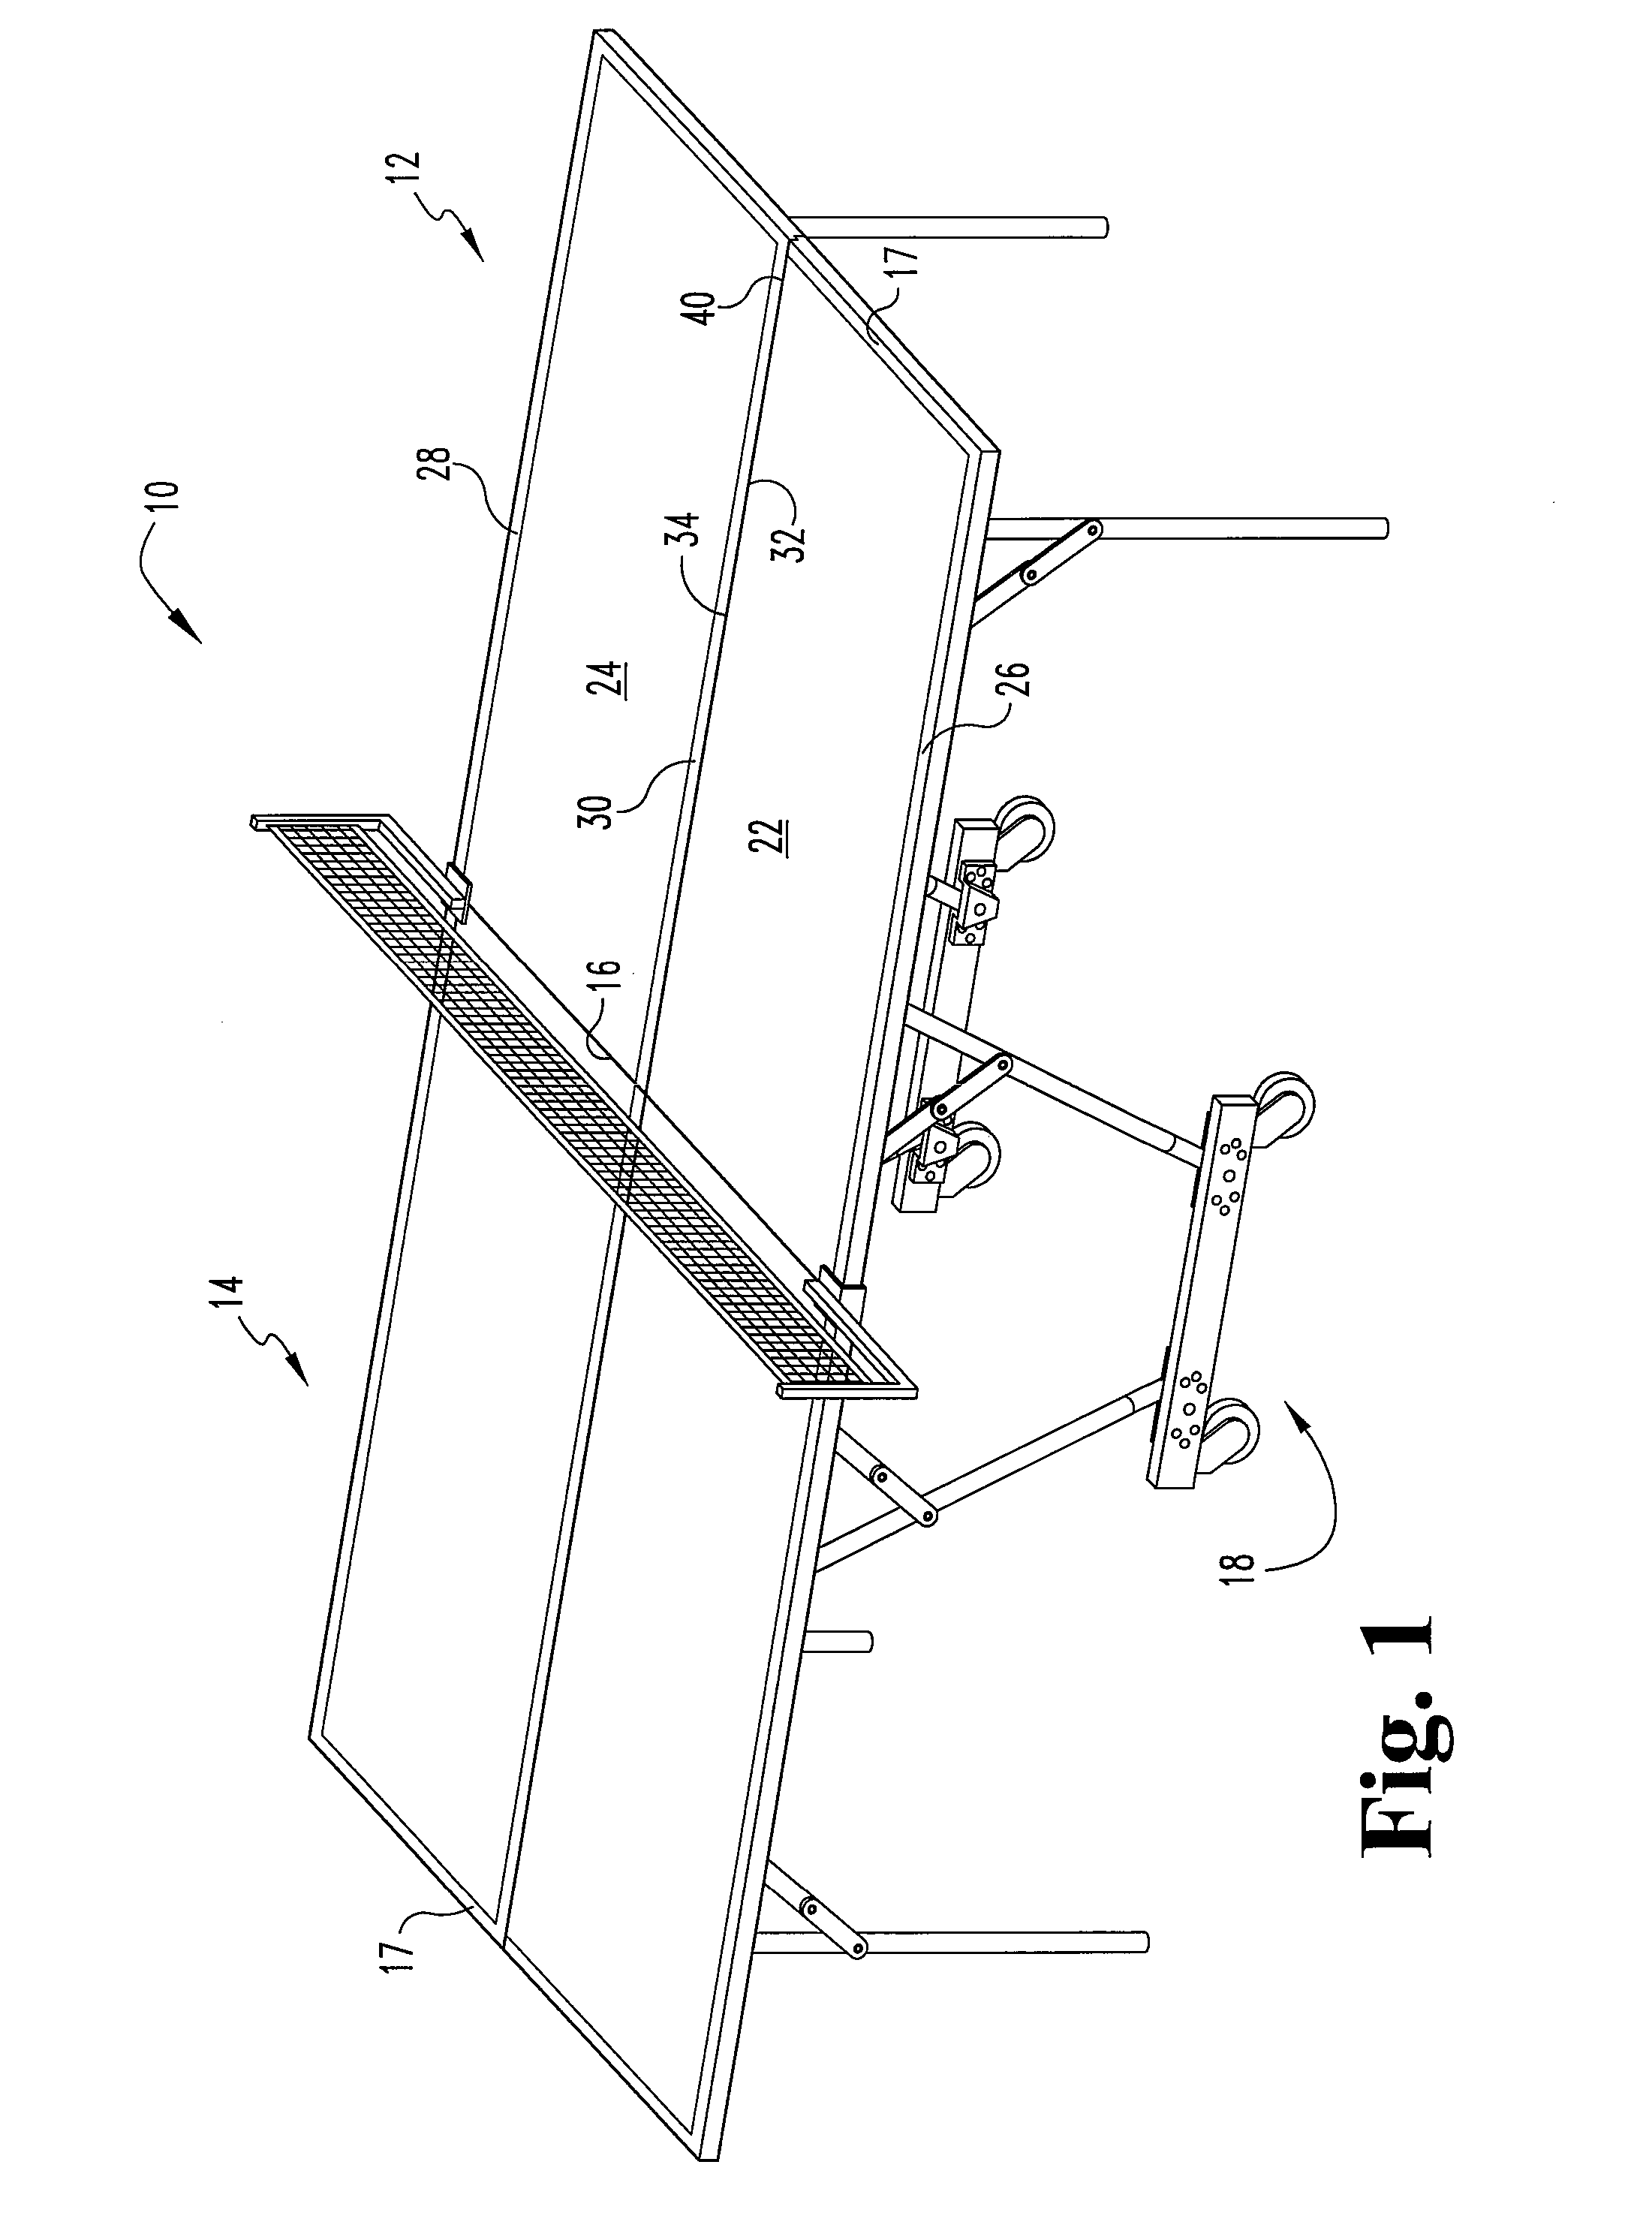 Four piece table tennis table having a stabilized joint